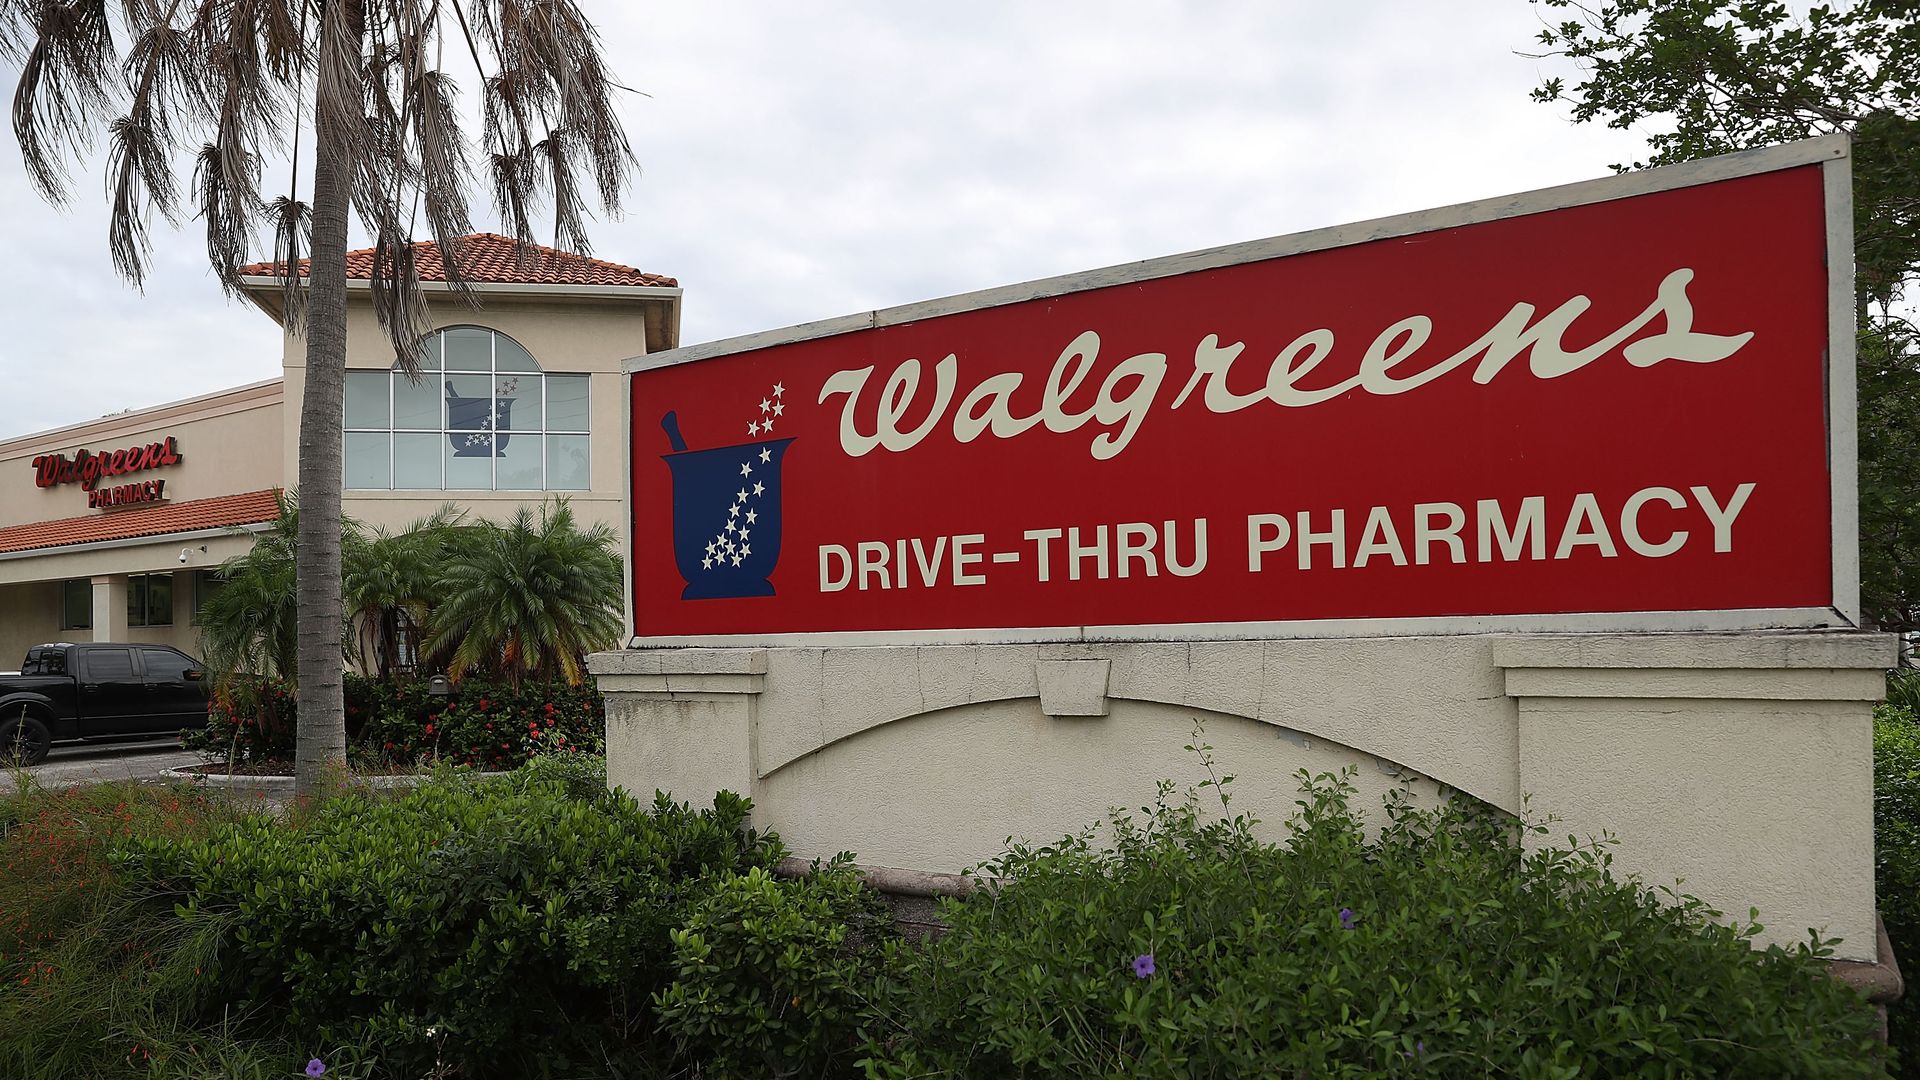 Walgreens pharmacy sign in front of the store